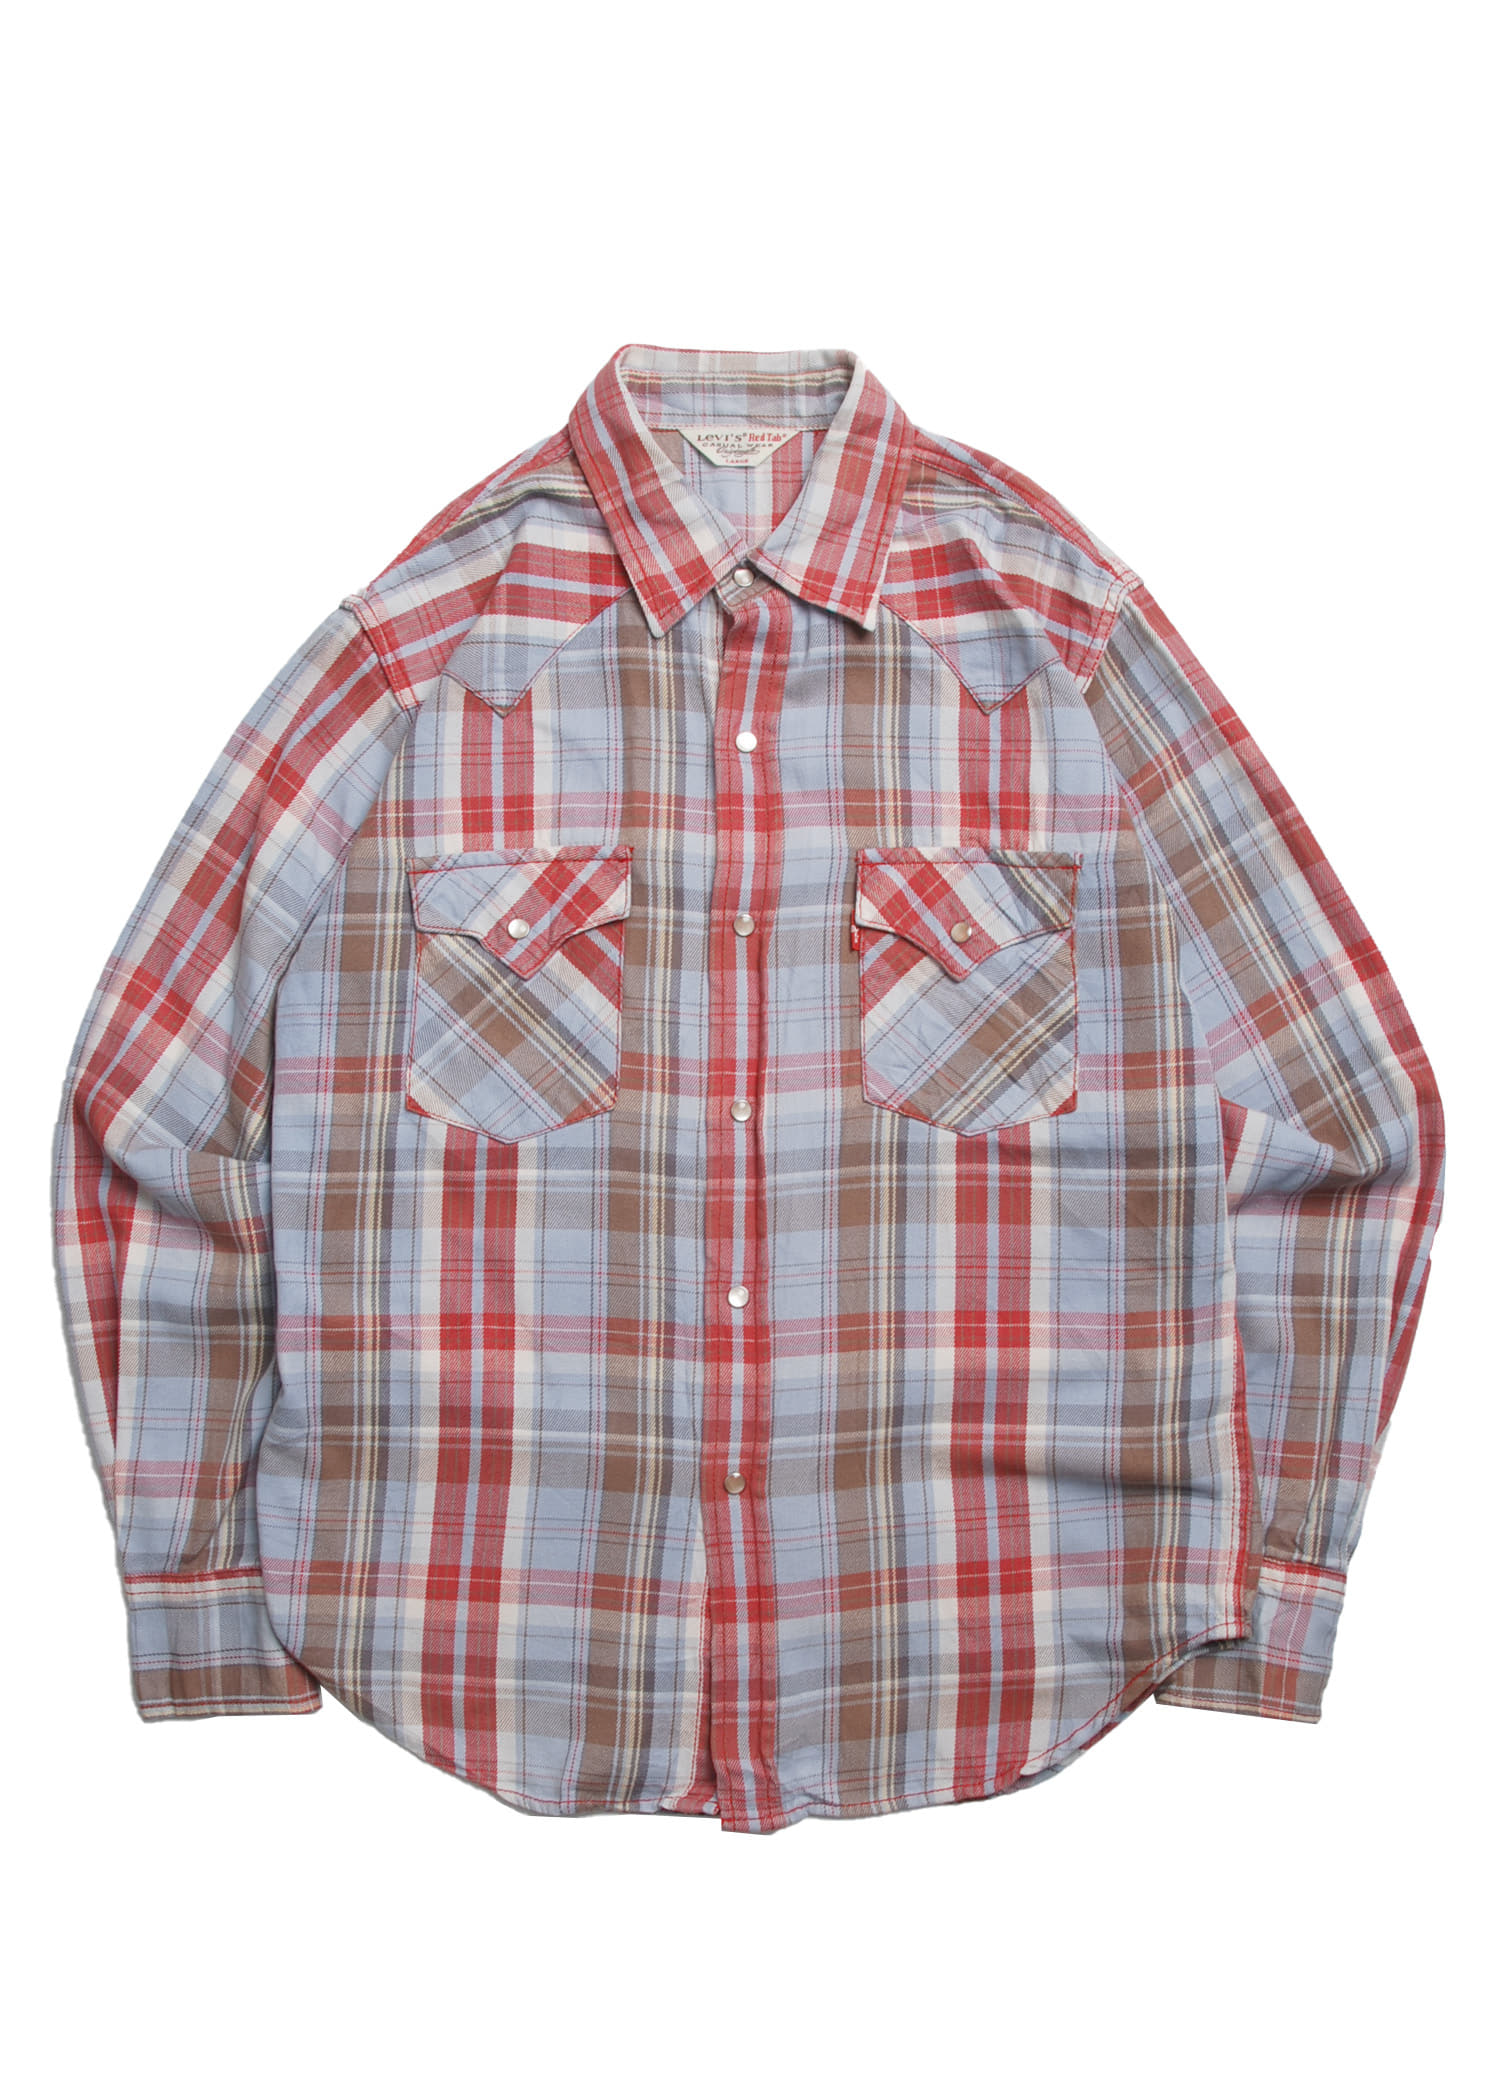 Levis Red Tab western shirts